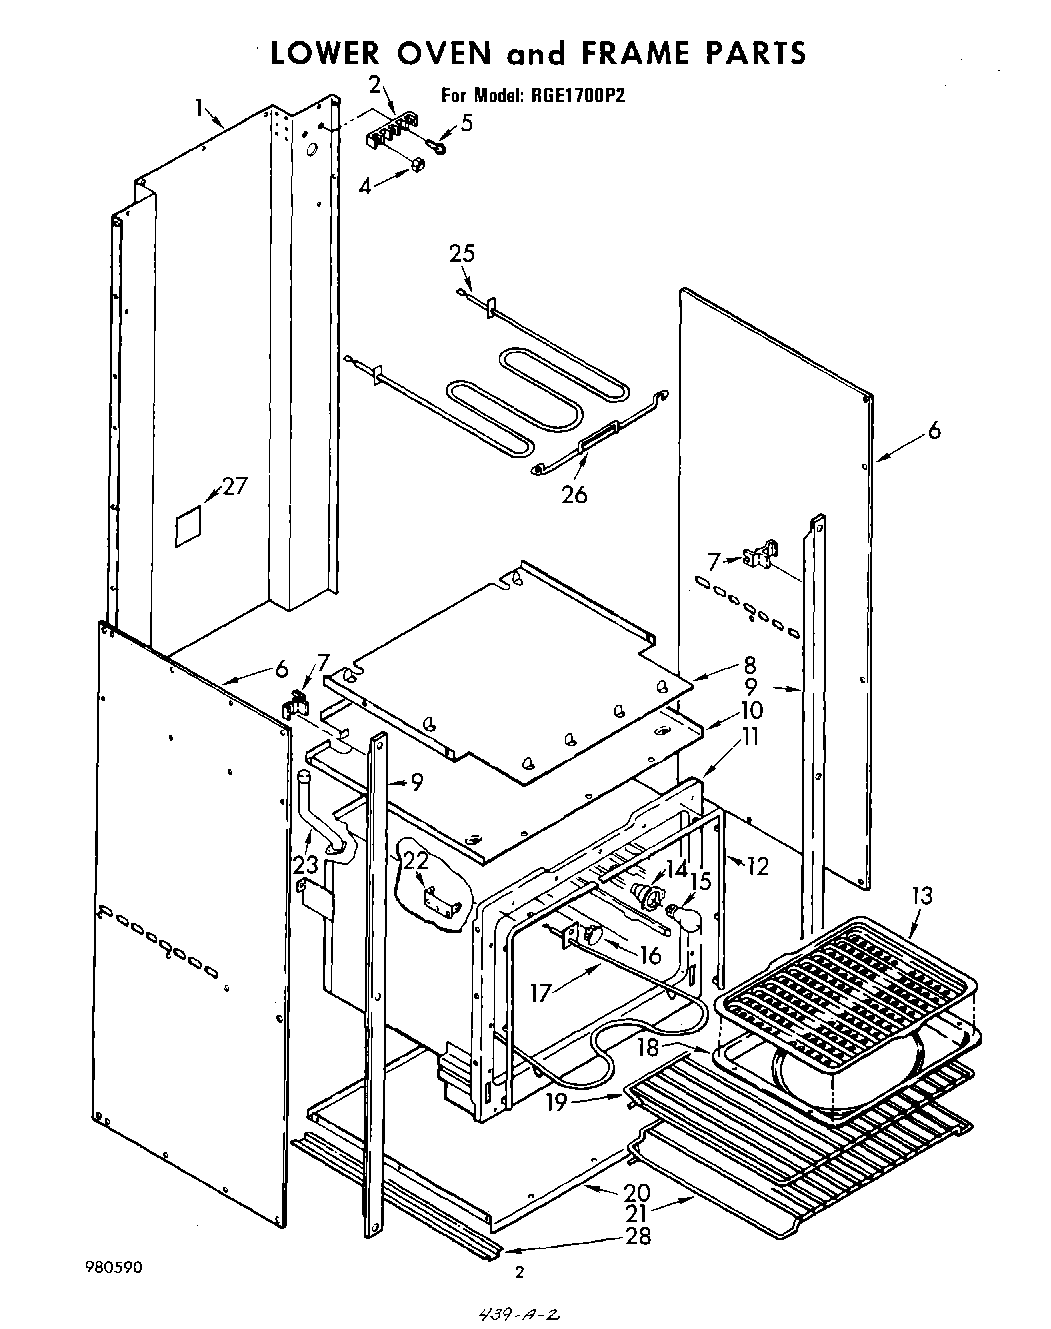 02 - LOWER OVEN AND FRAME , LITERATURE A